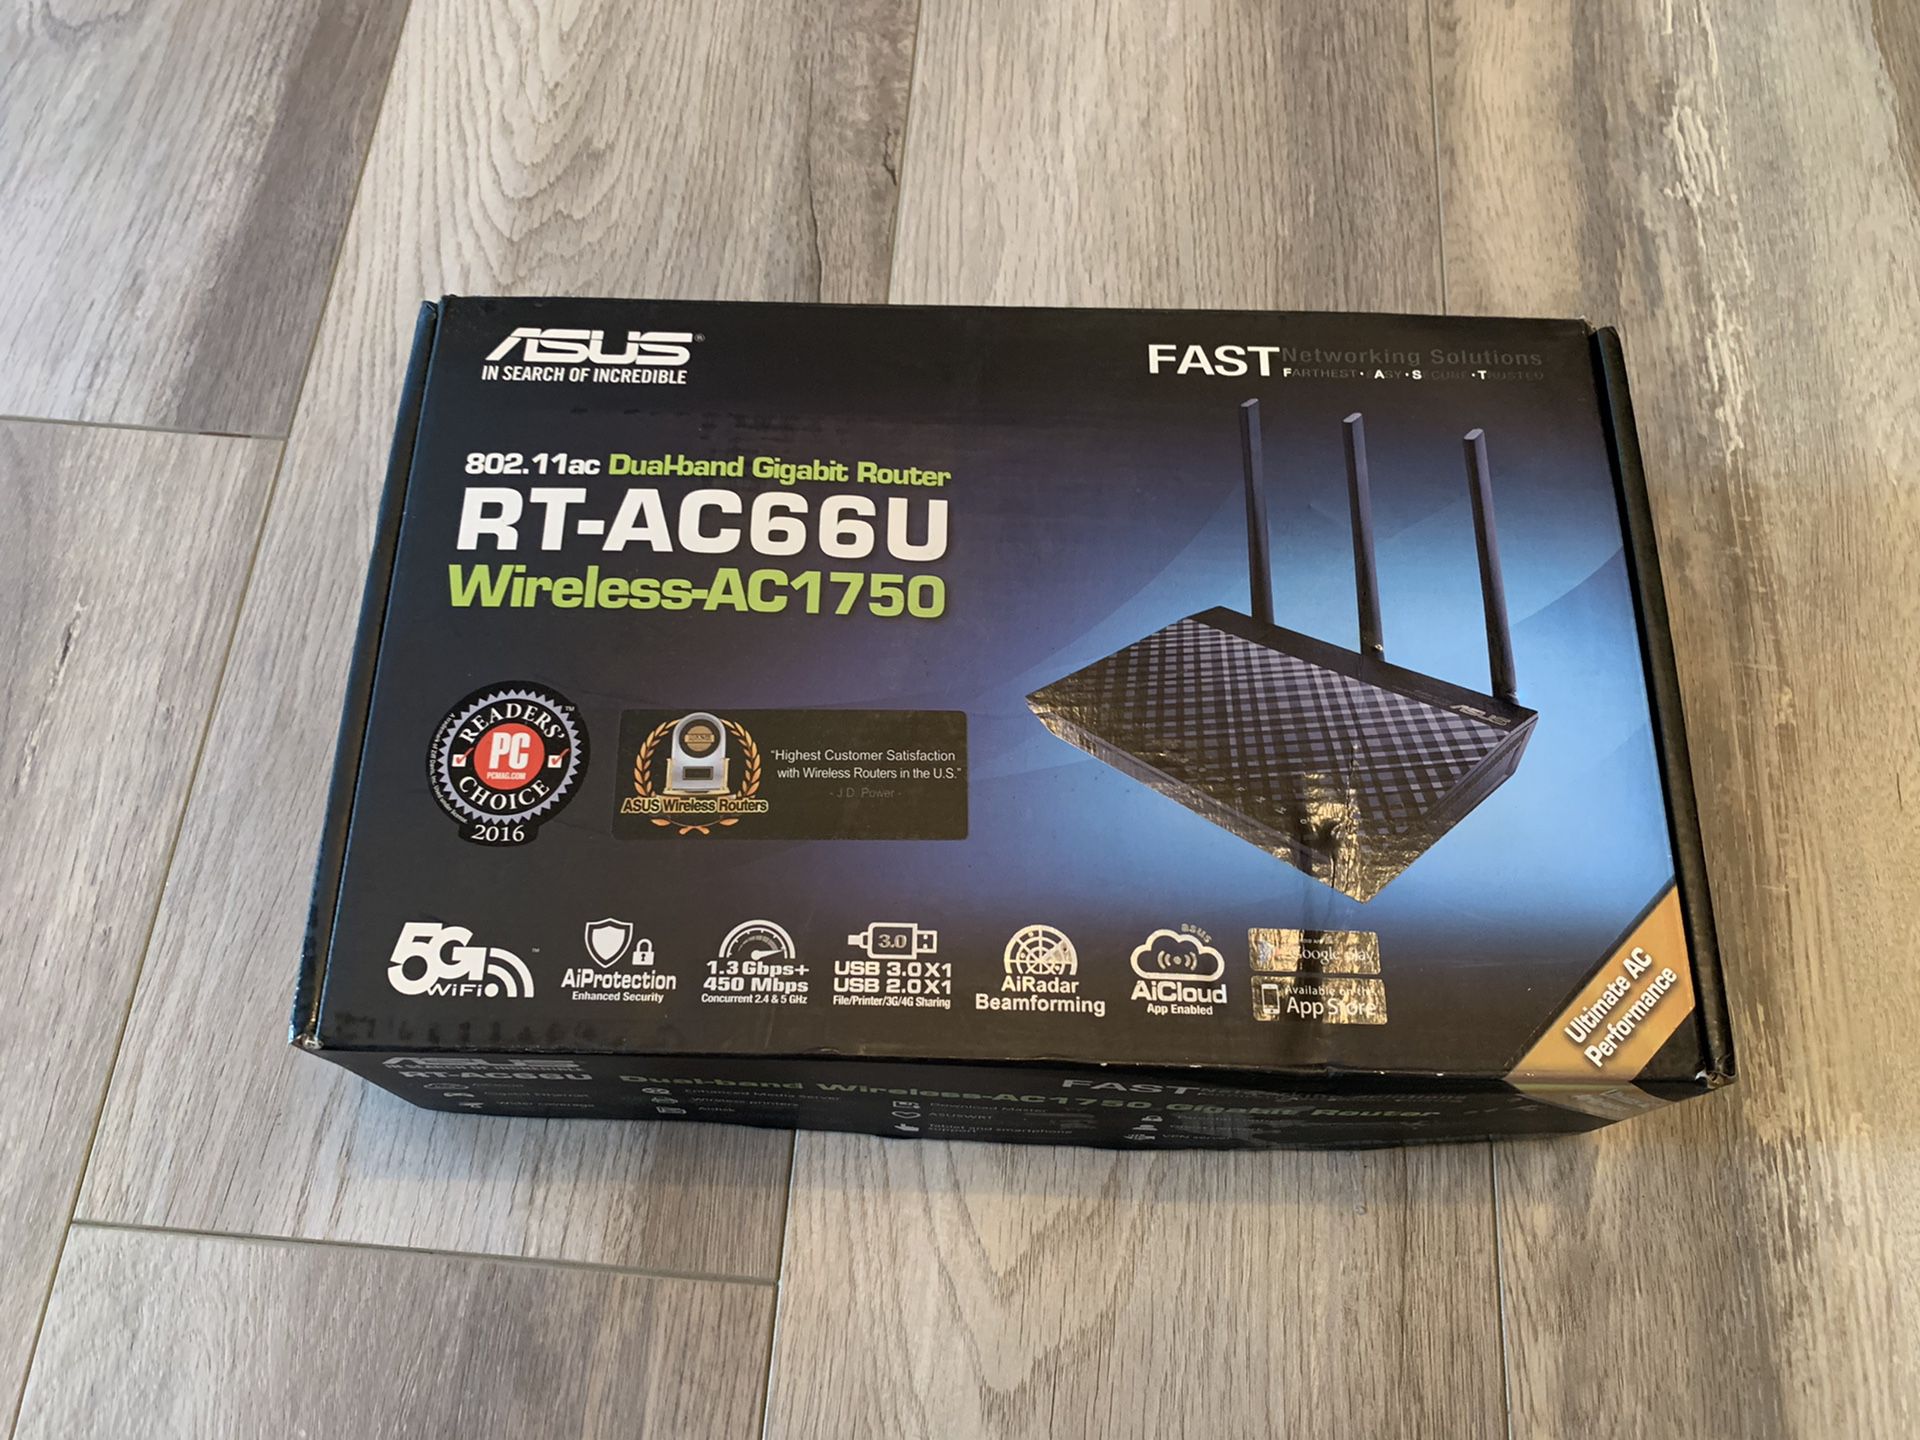 ASUS Wireless Router (open box - never been used)